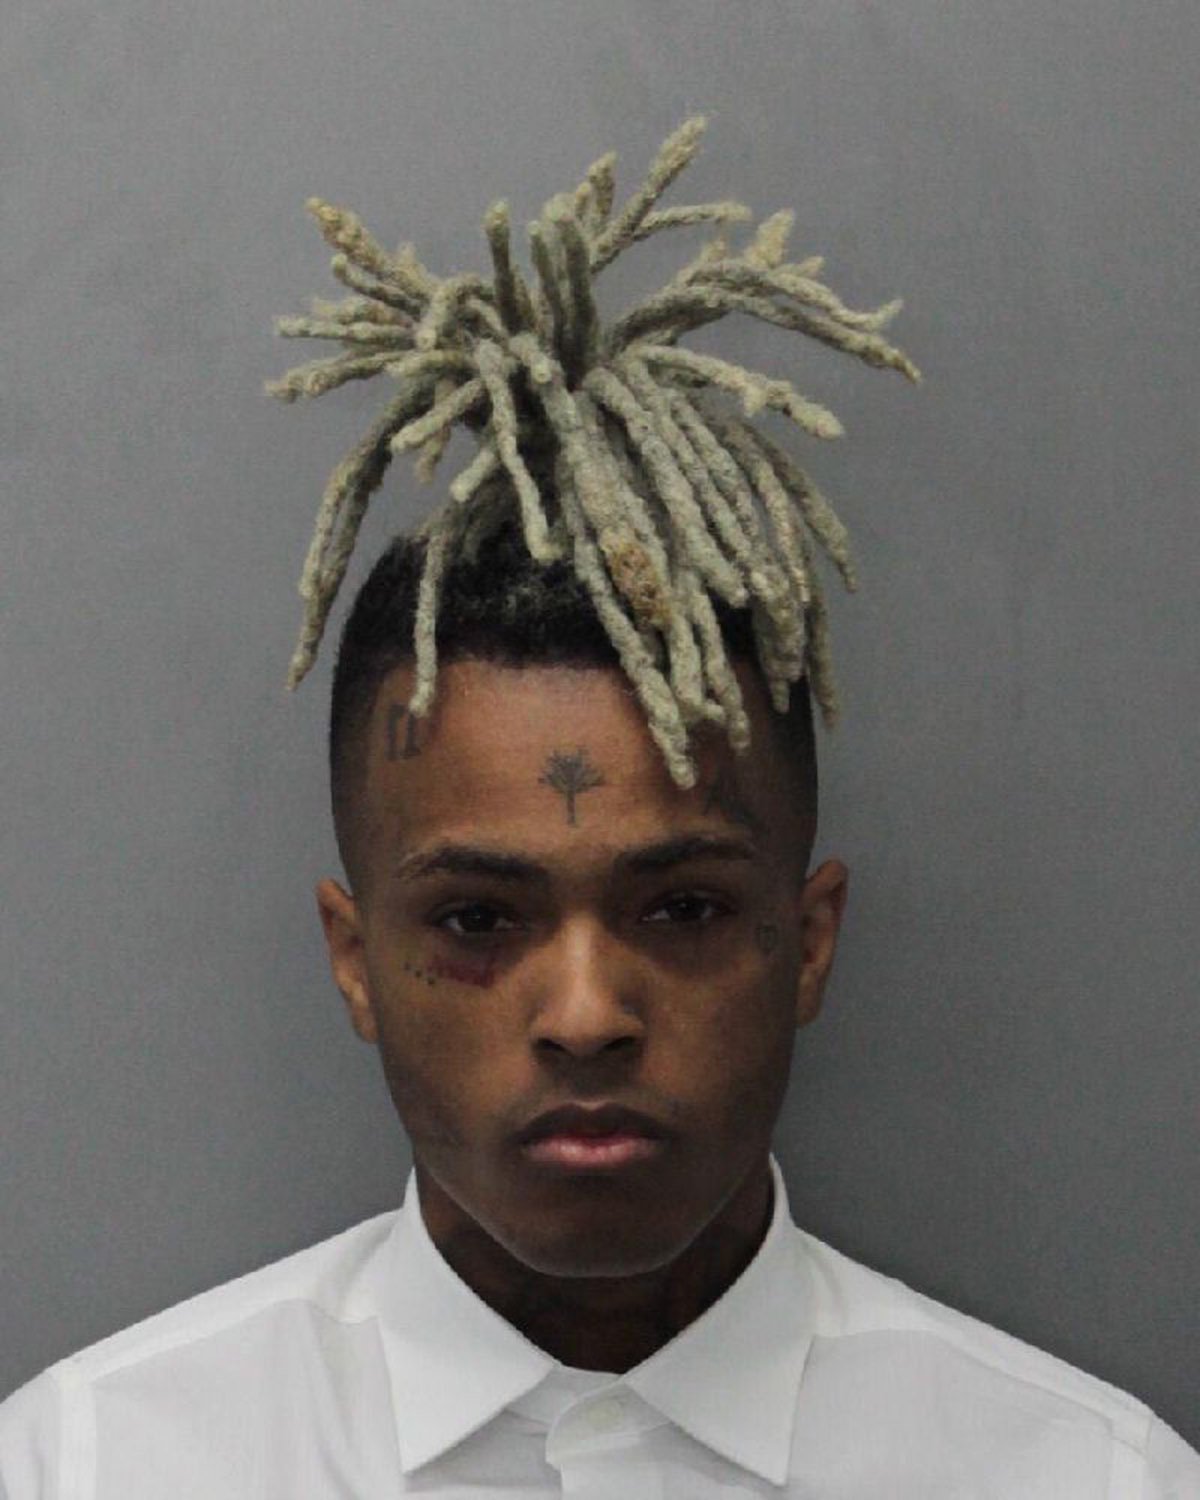 DECEMBER 15: In this handout provided by the Miami Dade County Corrections, Rapper XXXTentacion, also known as Jahseh Dwayne Onfroy poses for his mugshot after being charged with seven new felonies stemming from a 2016 domestic violence case on December 15, 2017 in Miami, Florida. The new charges are for witness tampering and harassment. (Photo by Miami Dade County Corrections via Getty Images)